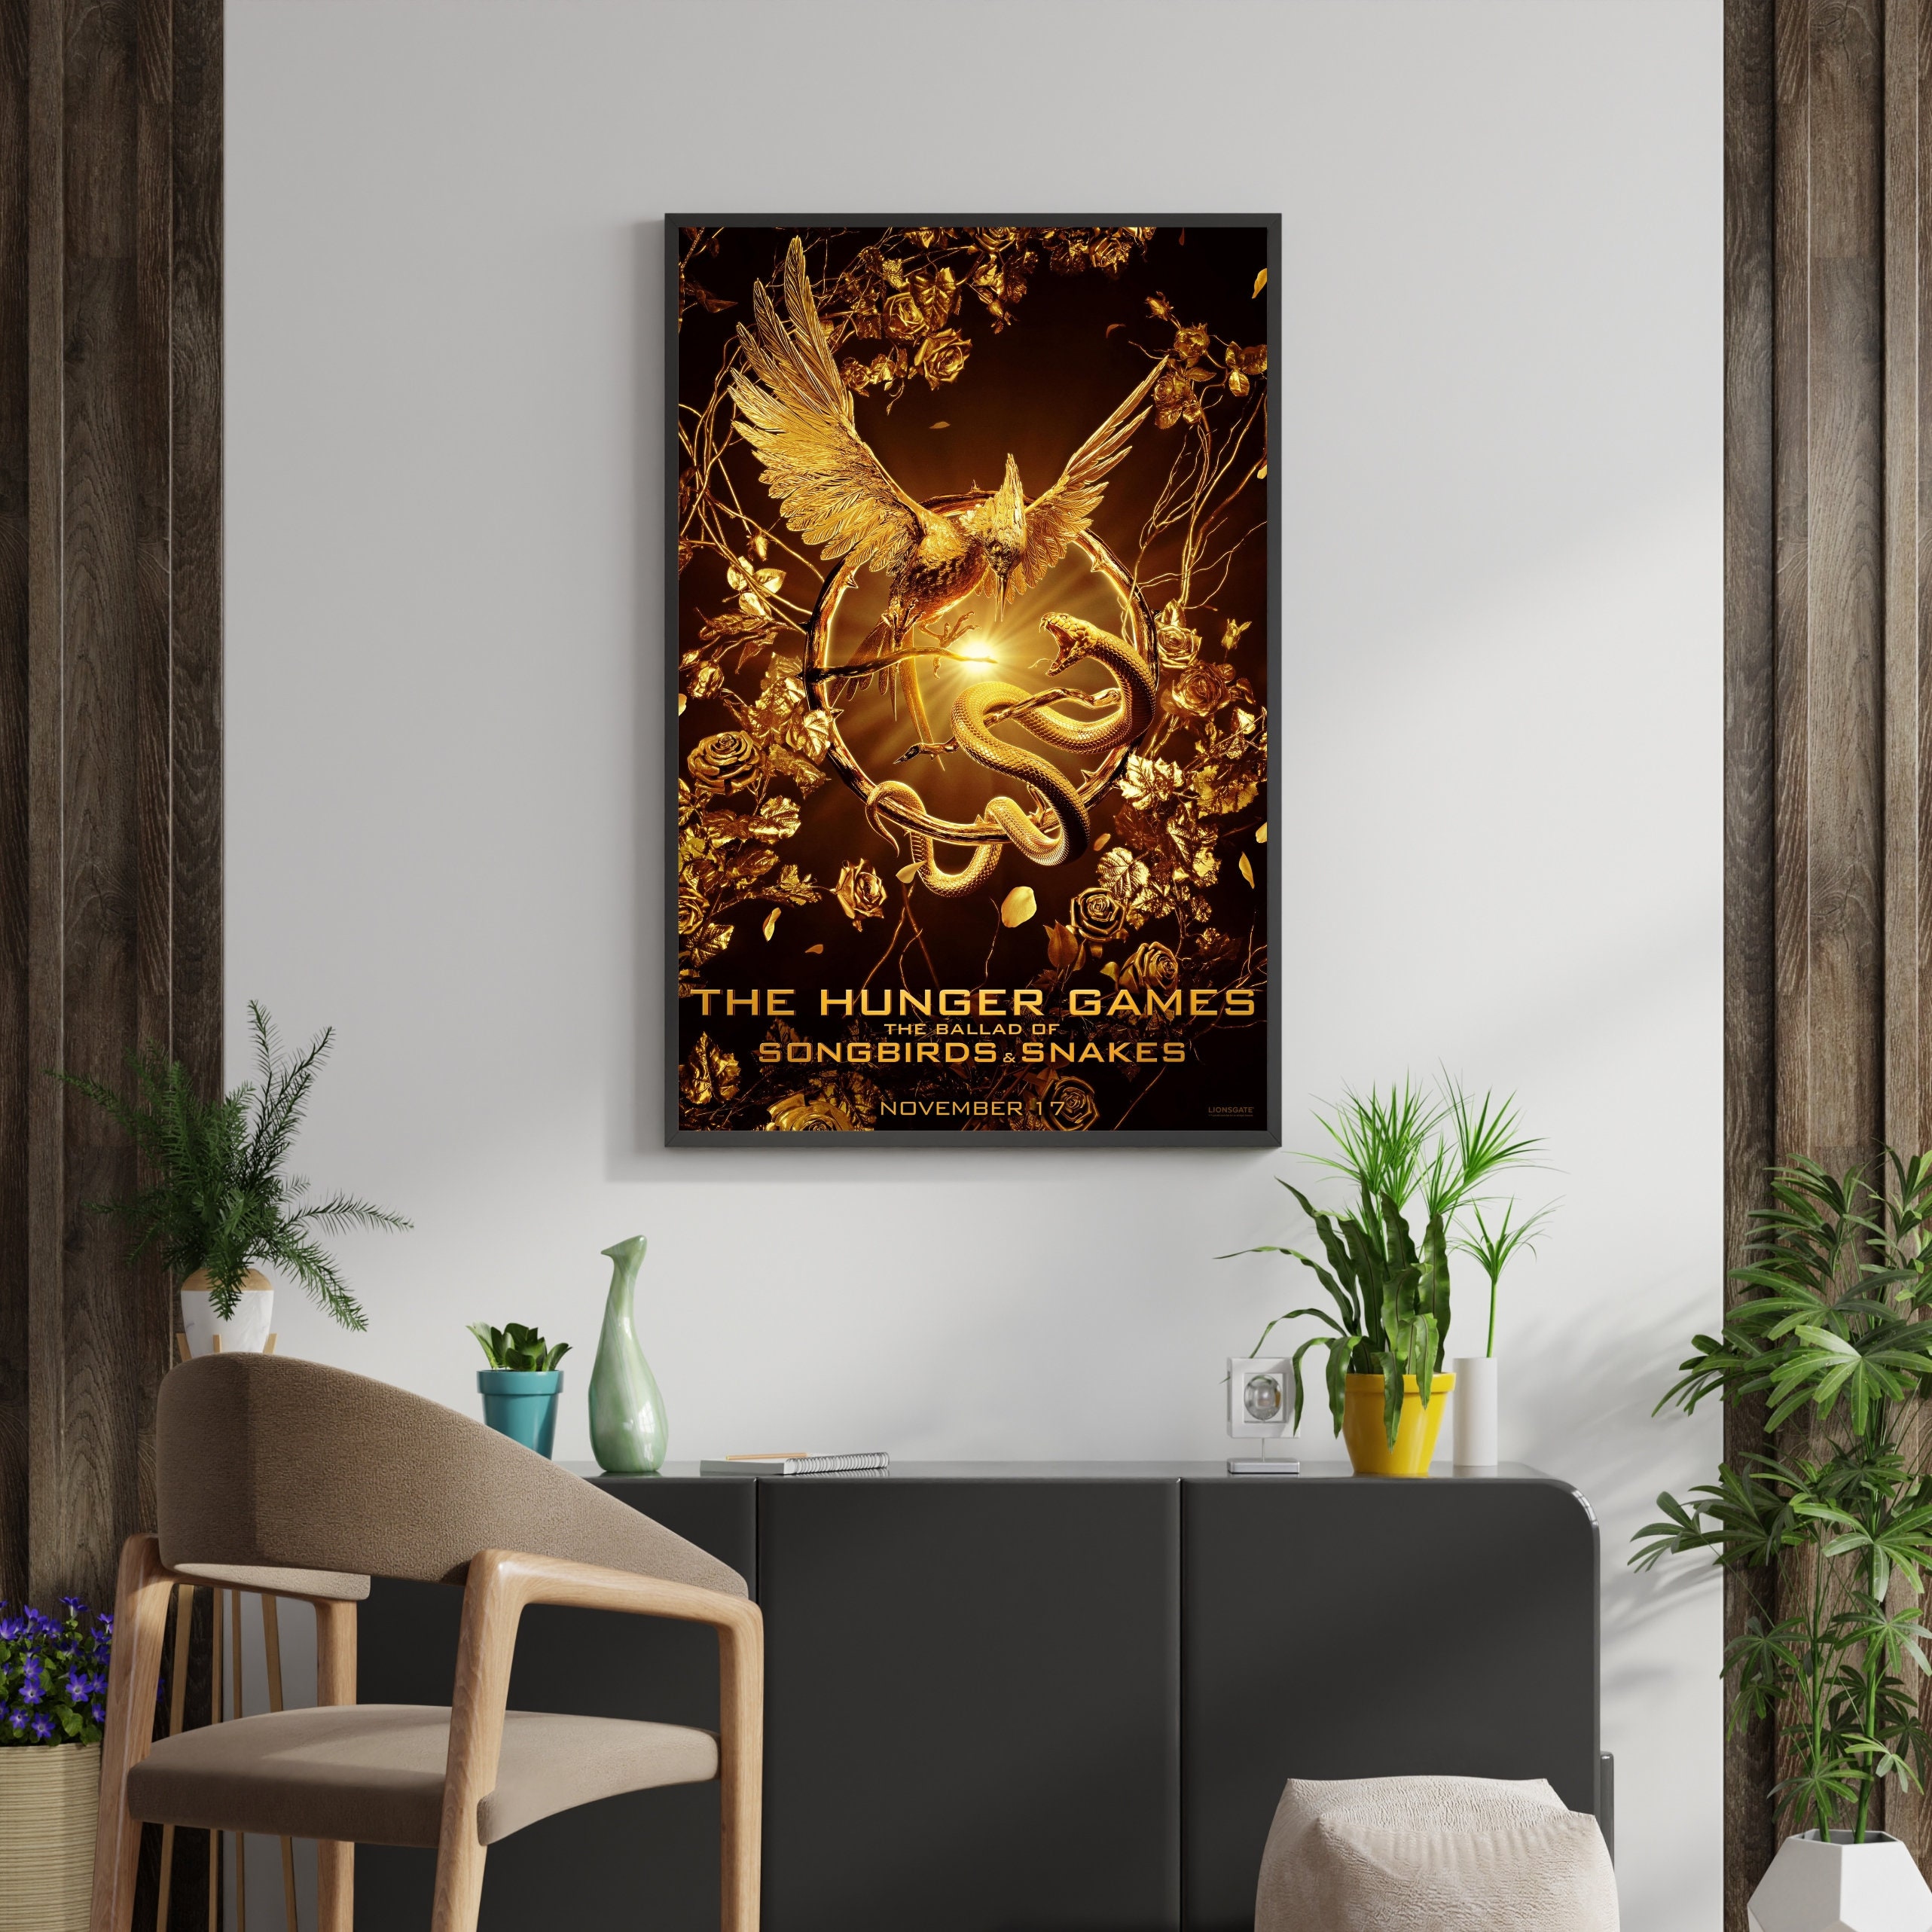 Discover The Hunger Games Poster High Quality The Hunger Games Poster The Hunger Games Wall Art The Hunger Games